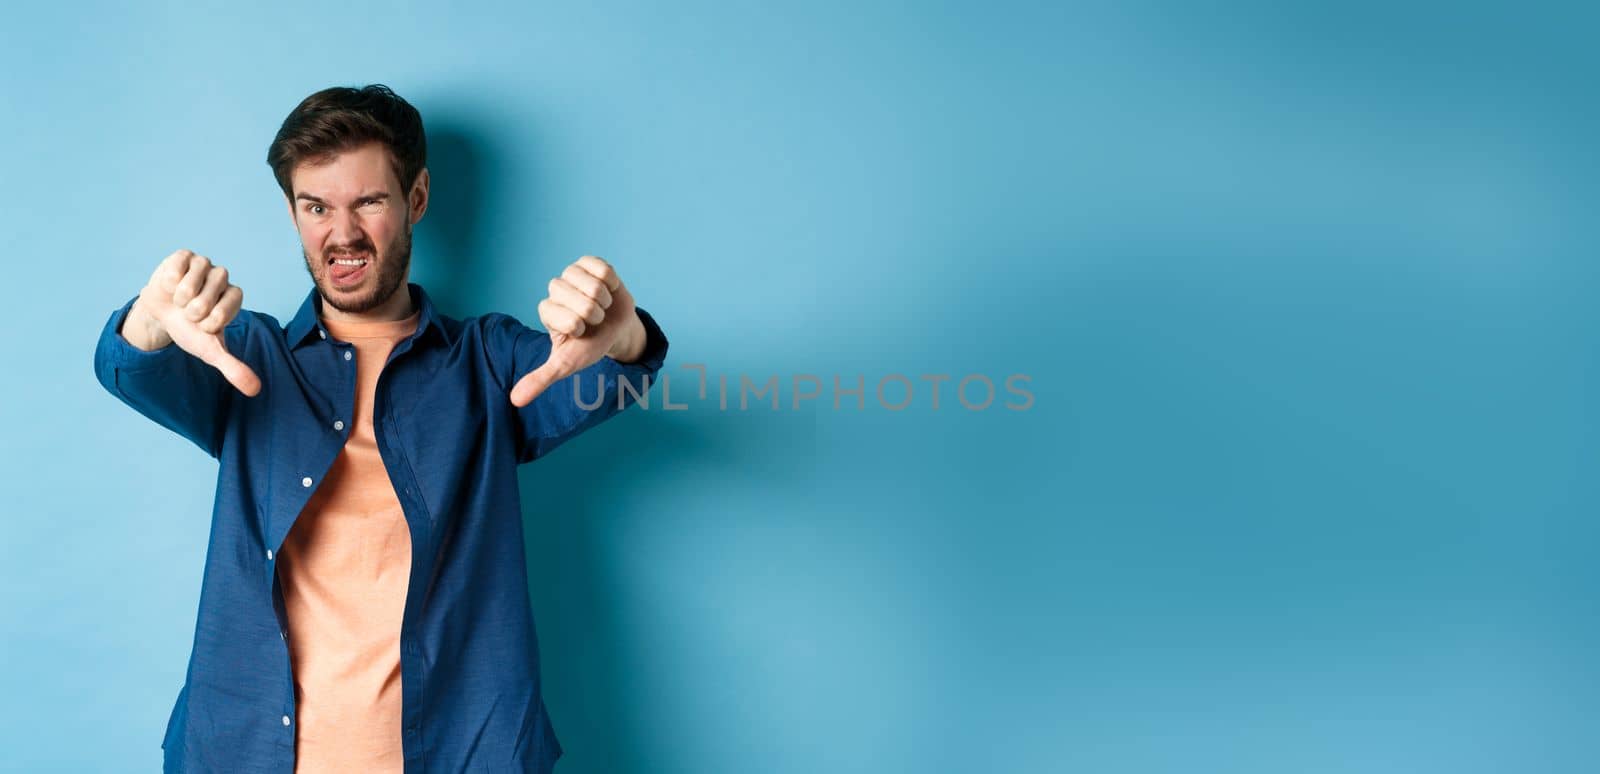 Disgusted guy express negative opinion, showing thumbs down and tongue, frowning upset, disapprove something bad, standing on blue background.